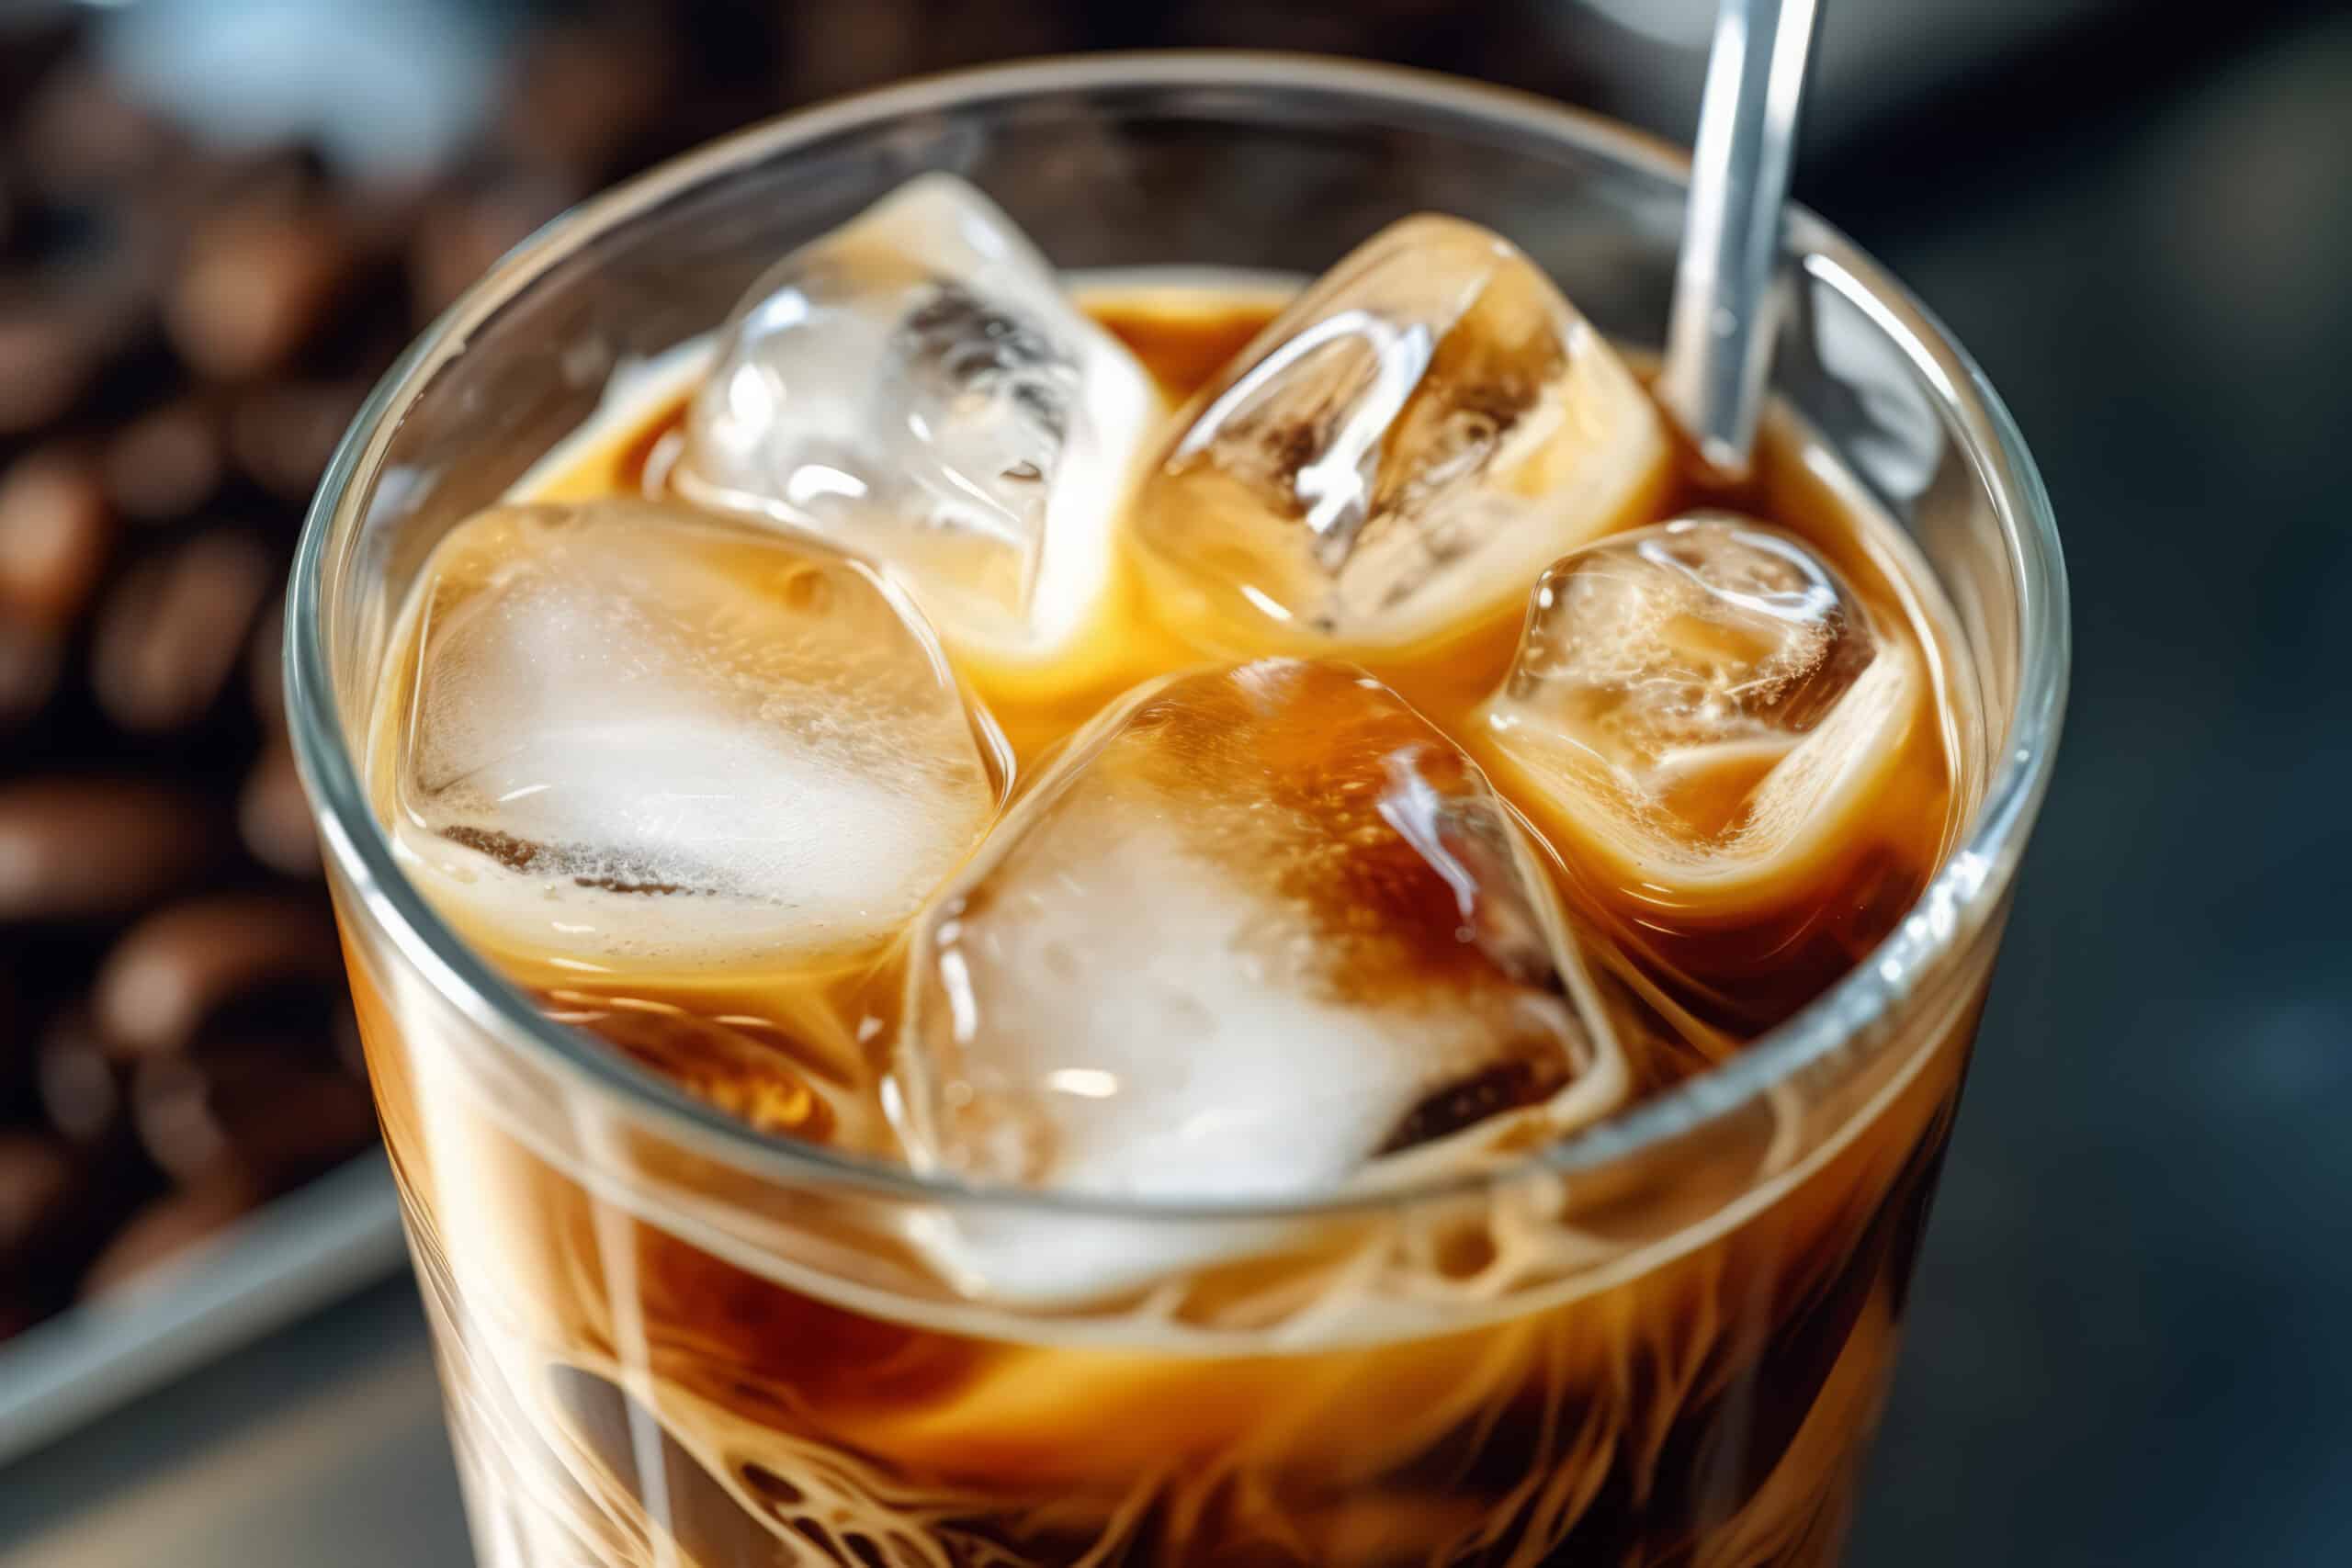 www.appr.com : How To Make Pour Over Iced Coffee?